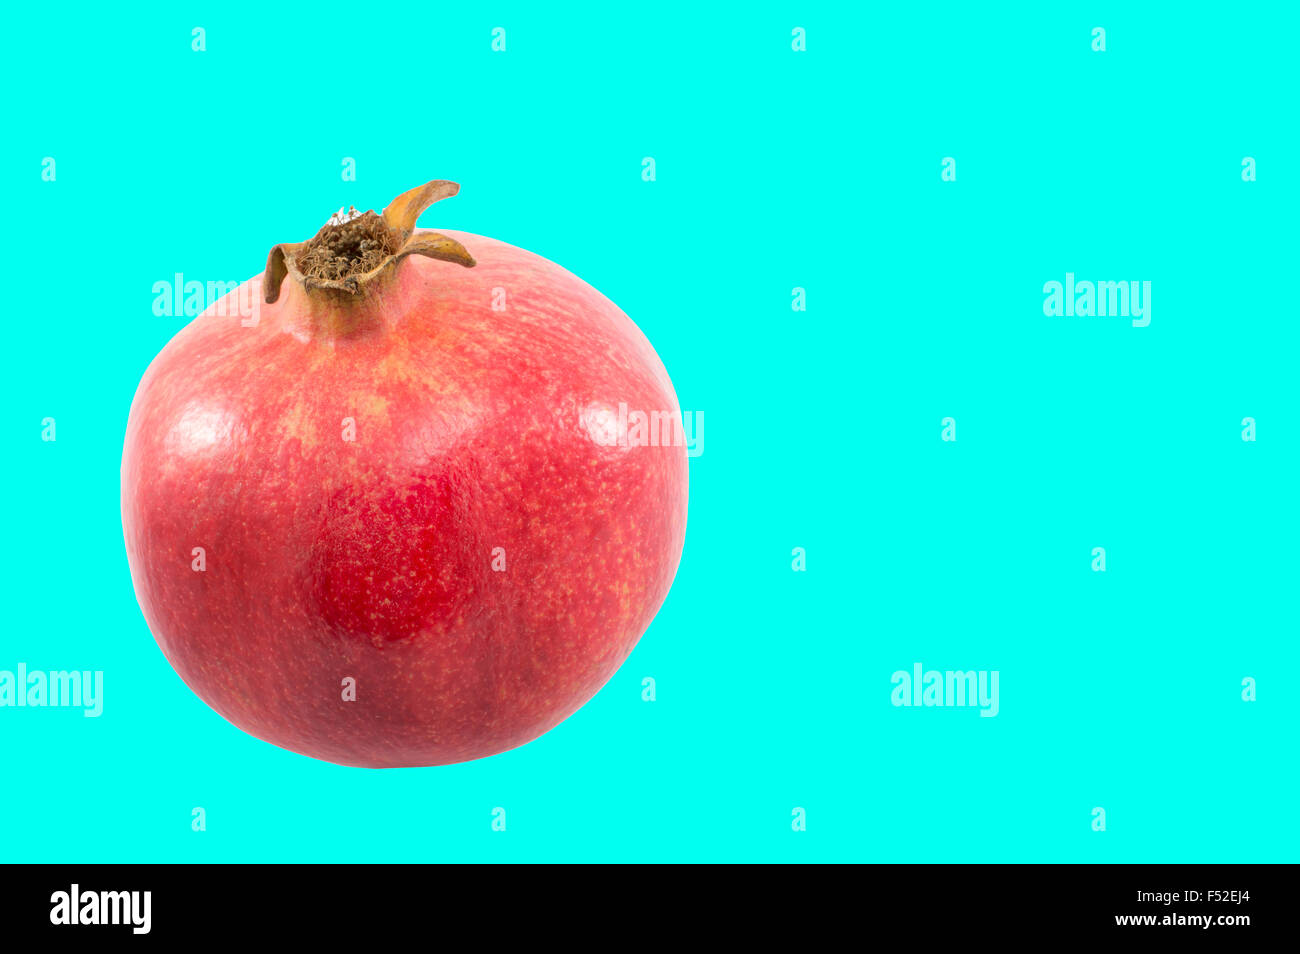 Juicy pomegranate on composite colored background Stock Photo